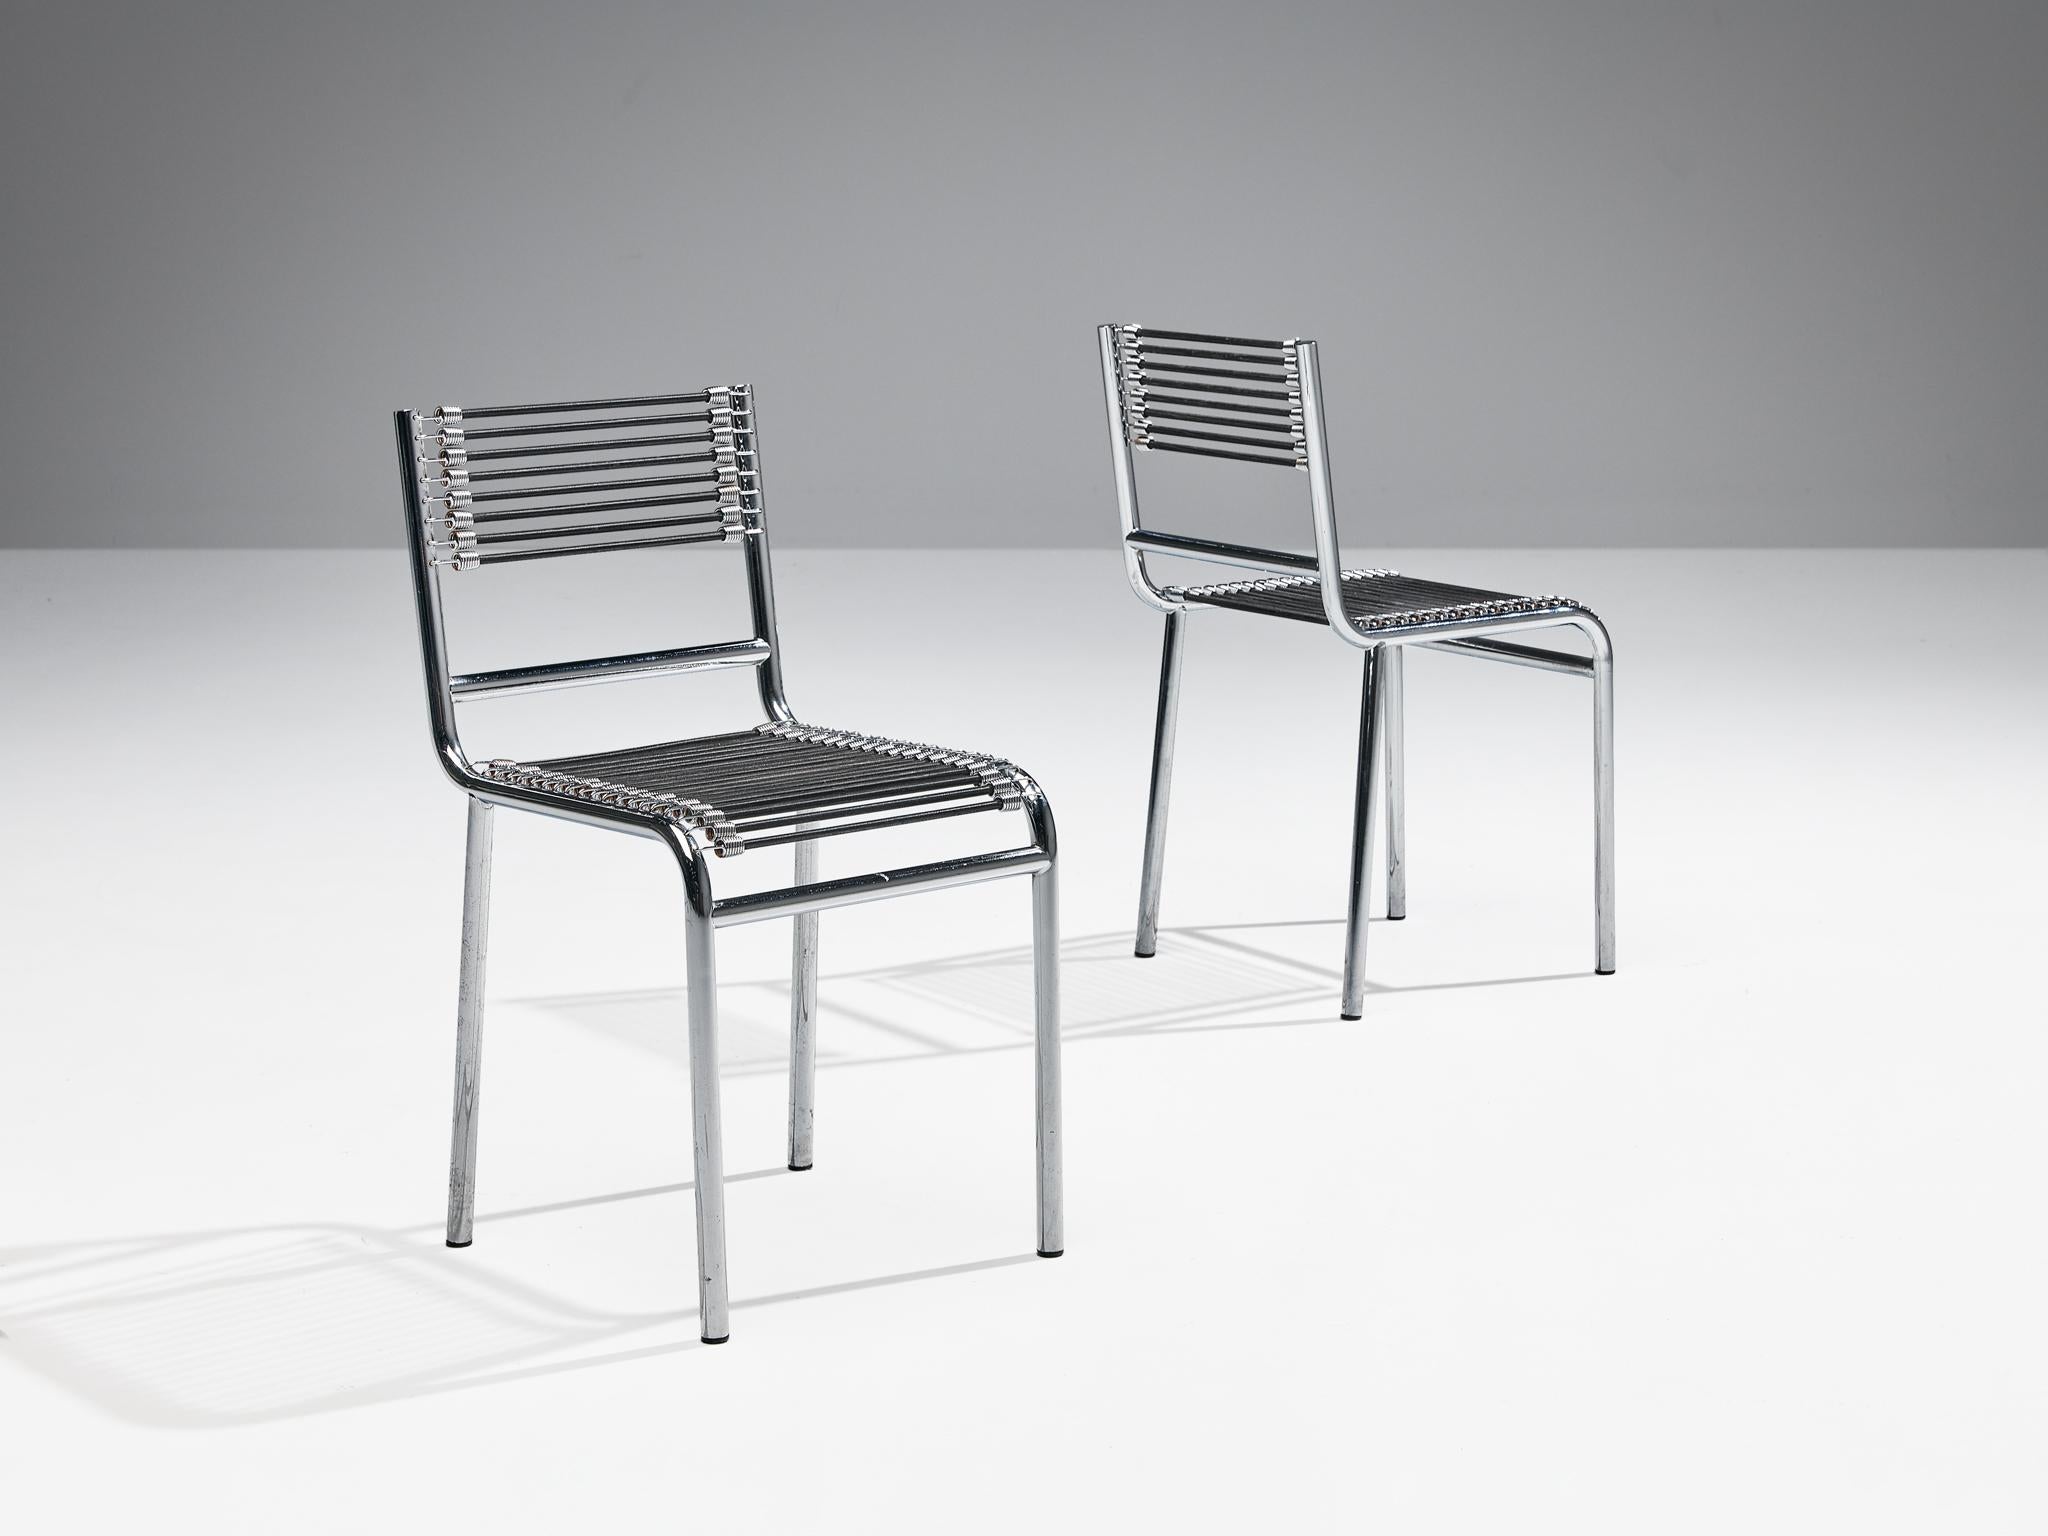 René Herbst, pair of 'Sandows' chairs, model '101', chrome-plated steel, elastic rope, France, design 1928, produced 1970s.

The 'Sandows' chair epitomizes the industrial advancements of the twenties, featuring a tubular steel construction